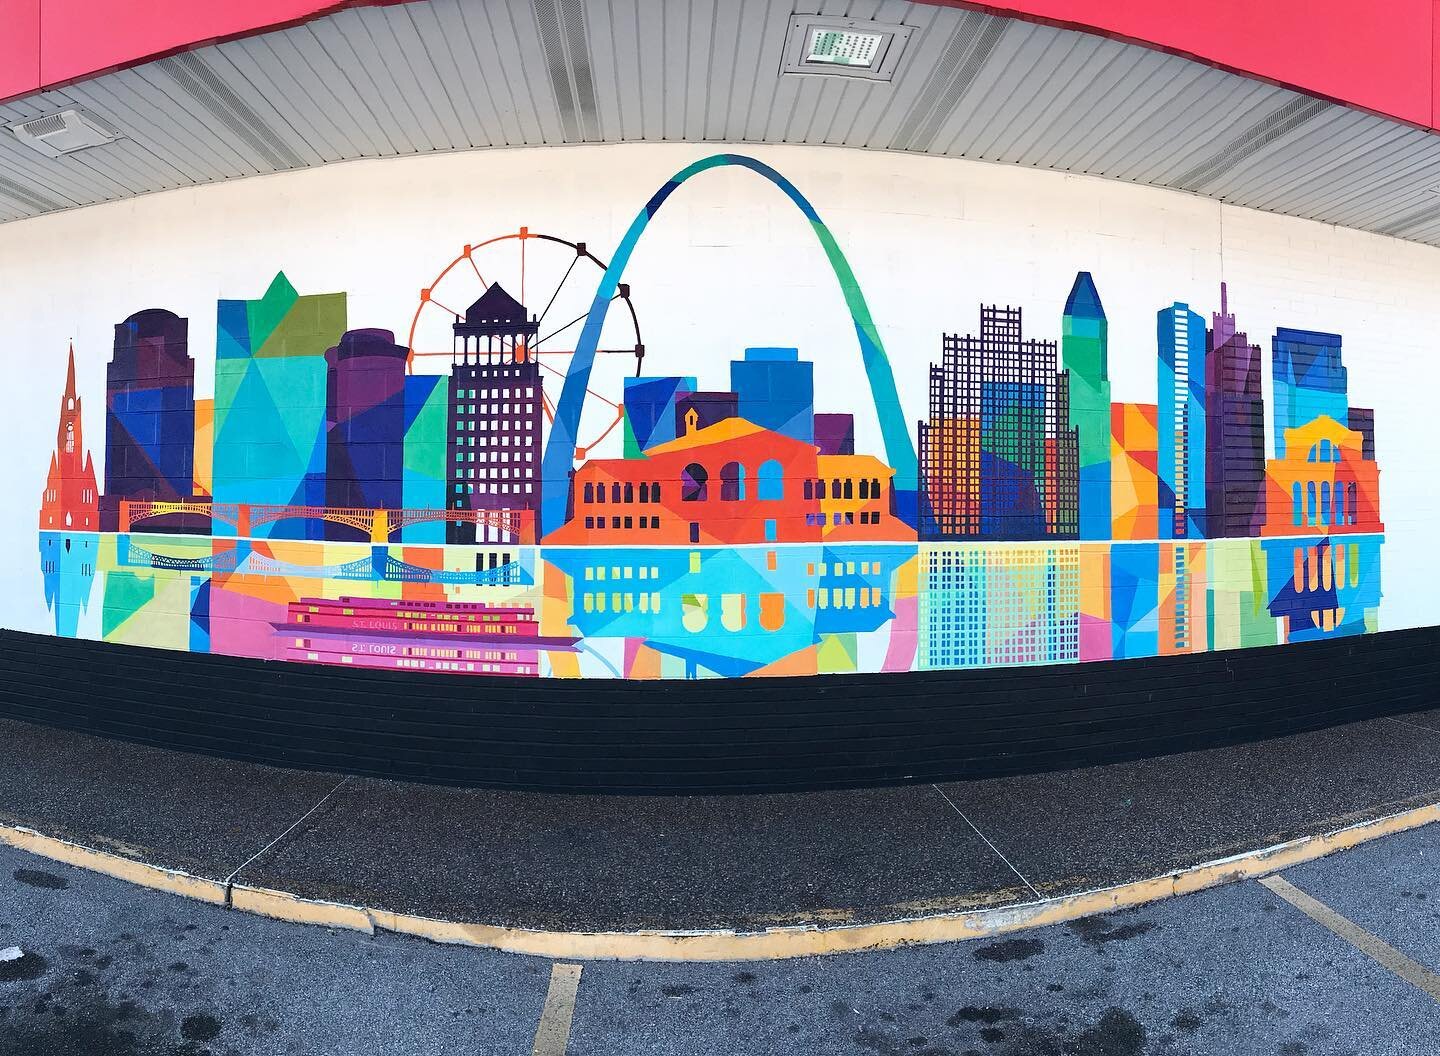 Had the pleasure of creating this mural for @arenaliquorstl the last couple weeks. Big thanks to my awesome team @kylelewsader with the design skills, @romeo_foreal and @salty_bananapants on the brush work. This mural is a thank you to the patrons of